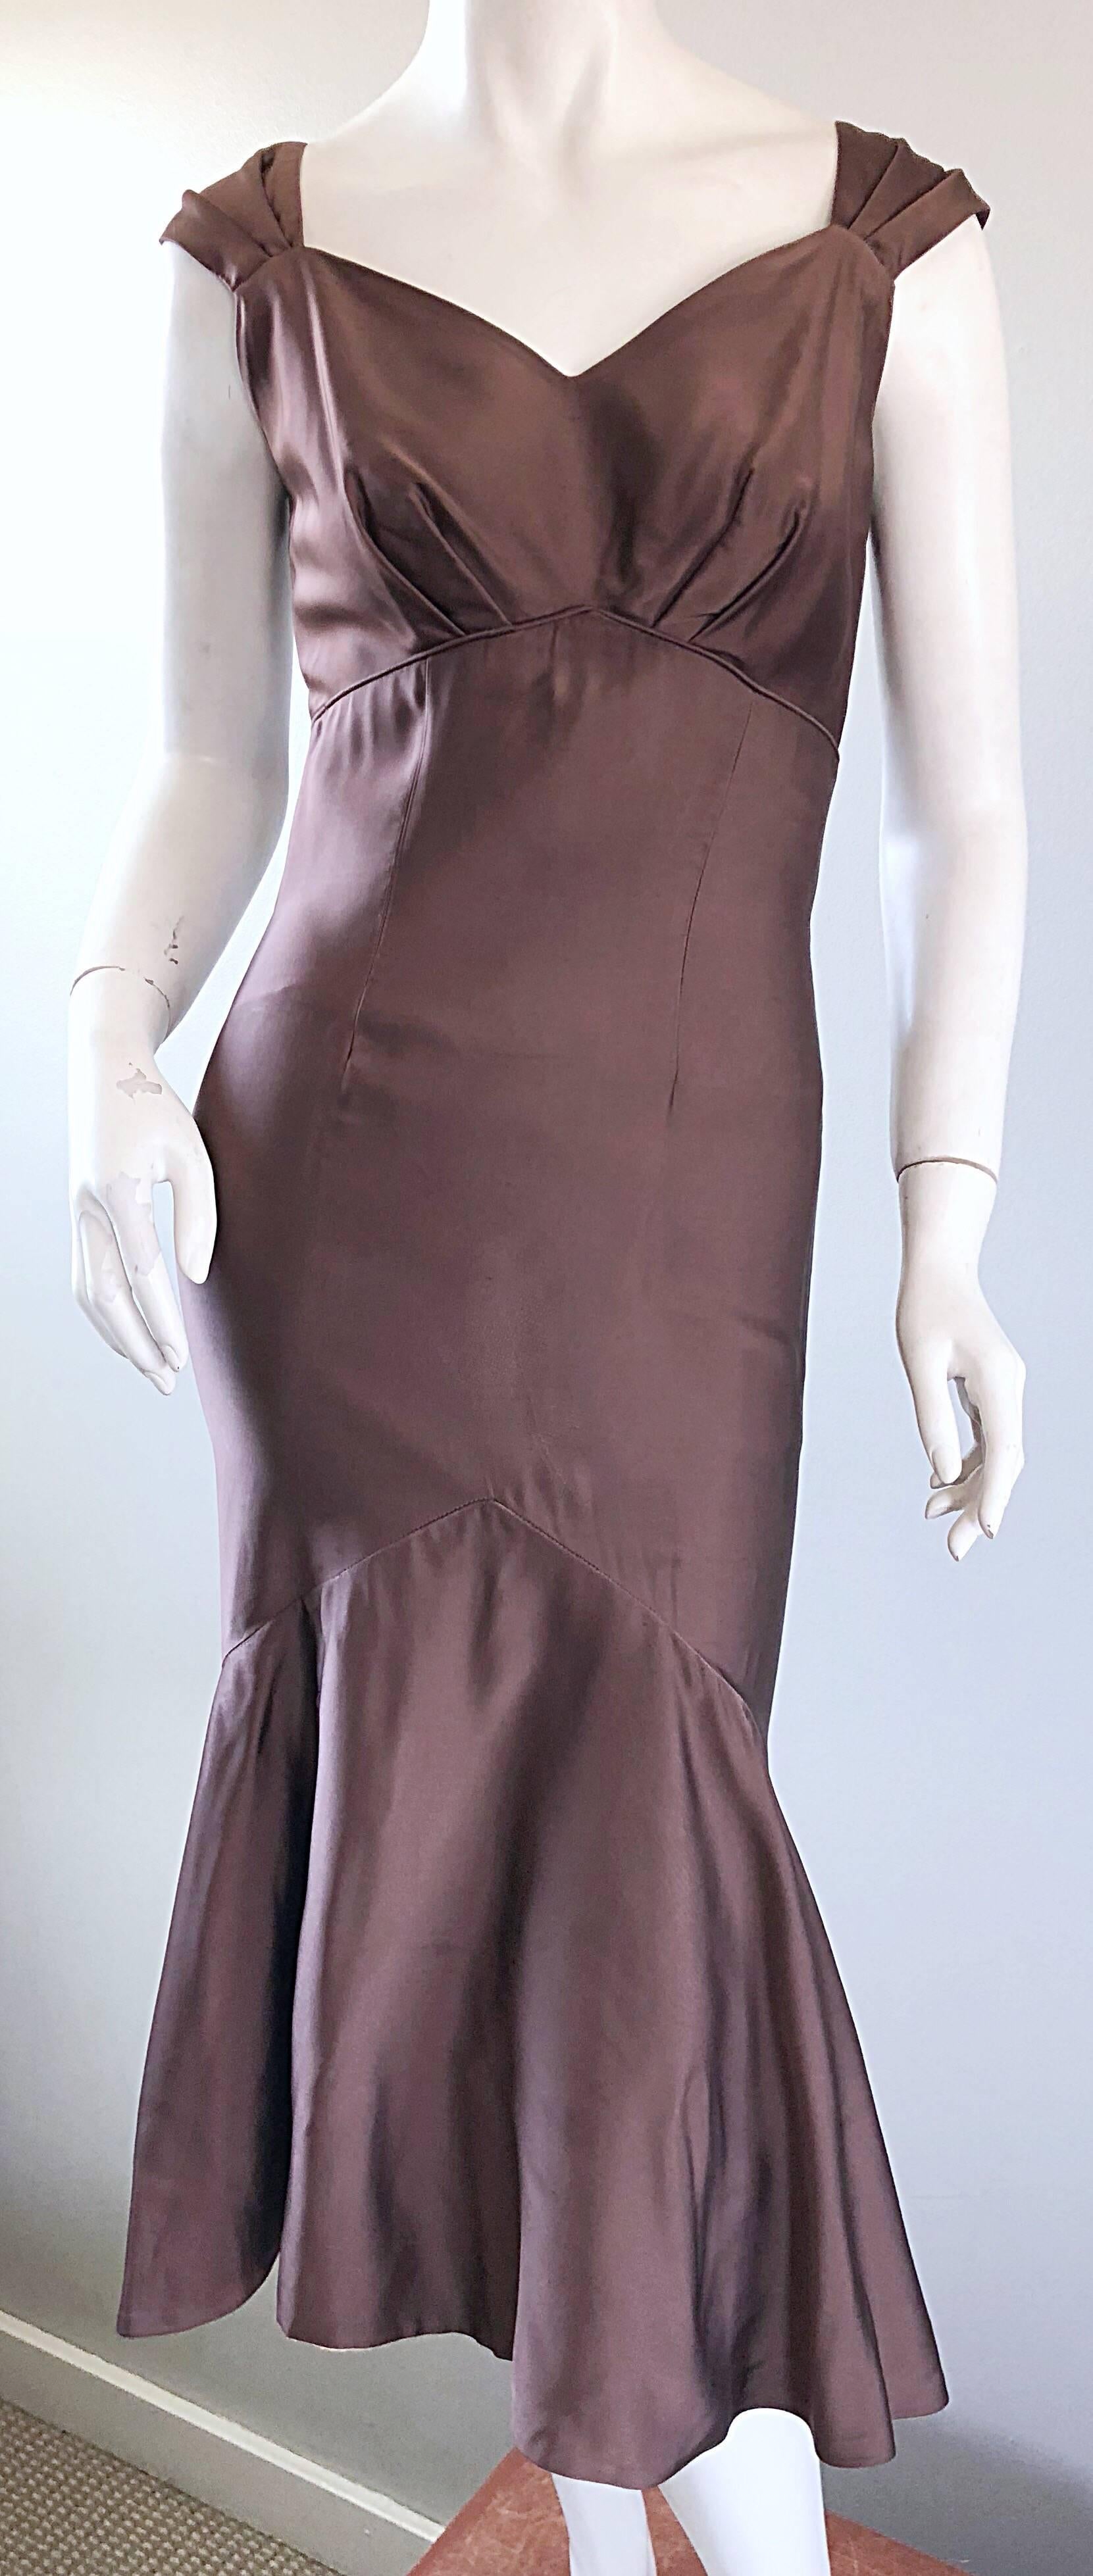 1950s Halmar Demi Couture Taupe / Light Brown Silk Vintage 50s Mermaid Hem Dress In Excellent Condition For Sale In San Diego, CA